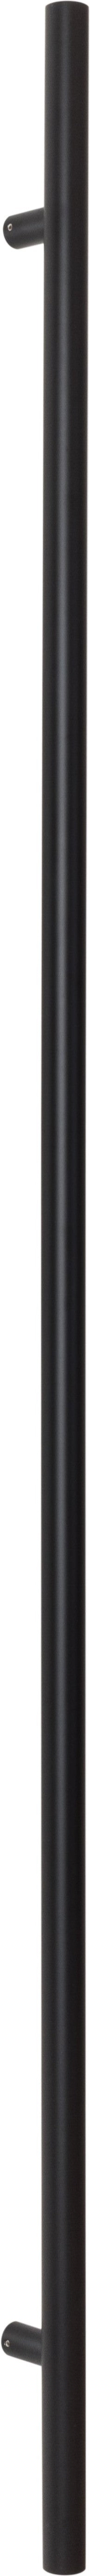 Sure-Loc 48" Round Long Door Pull, Single-Sided in Flat Black finish